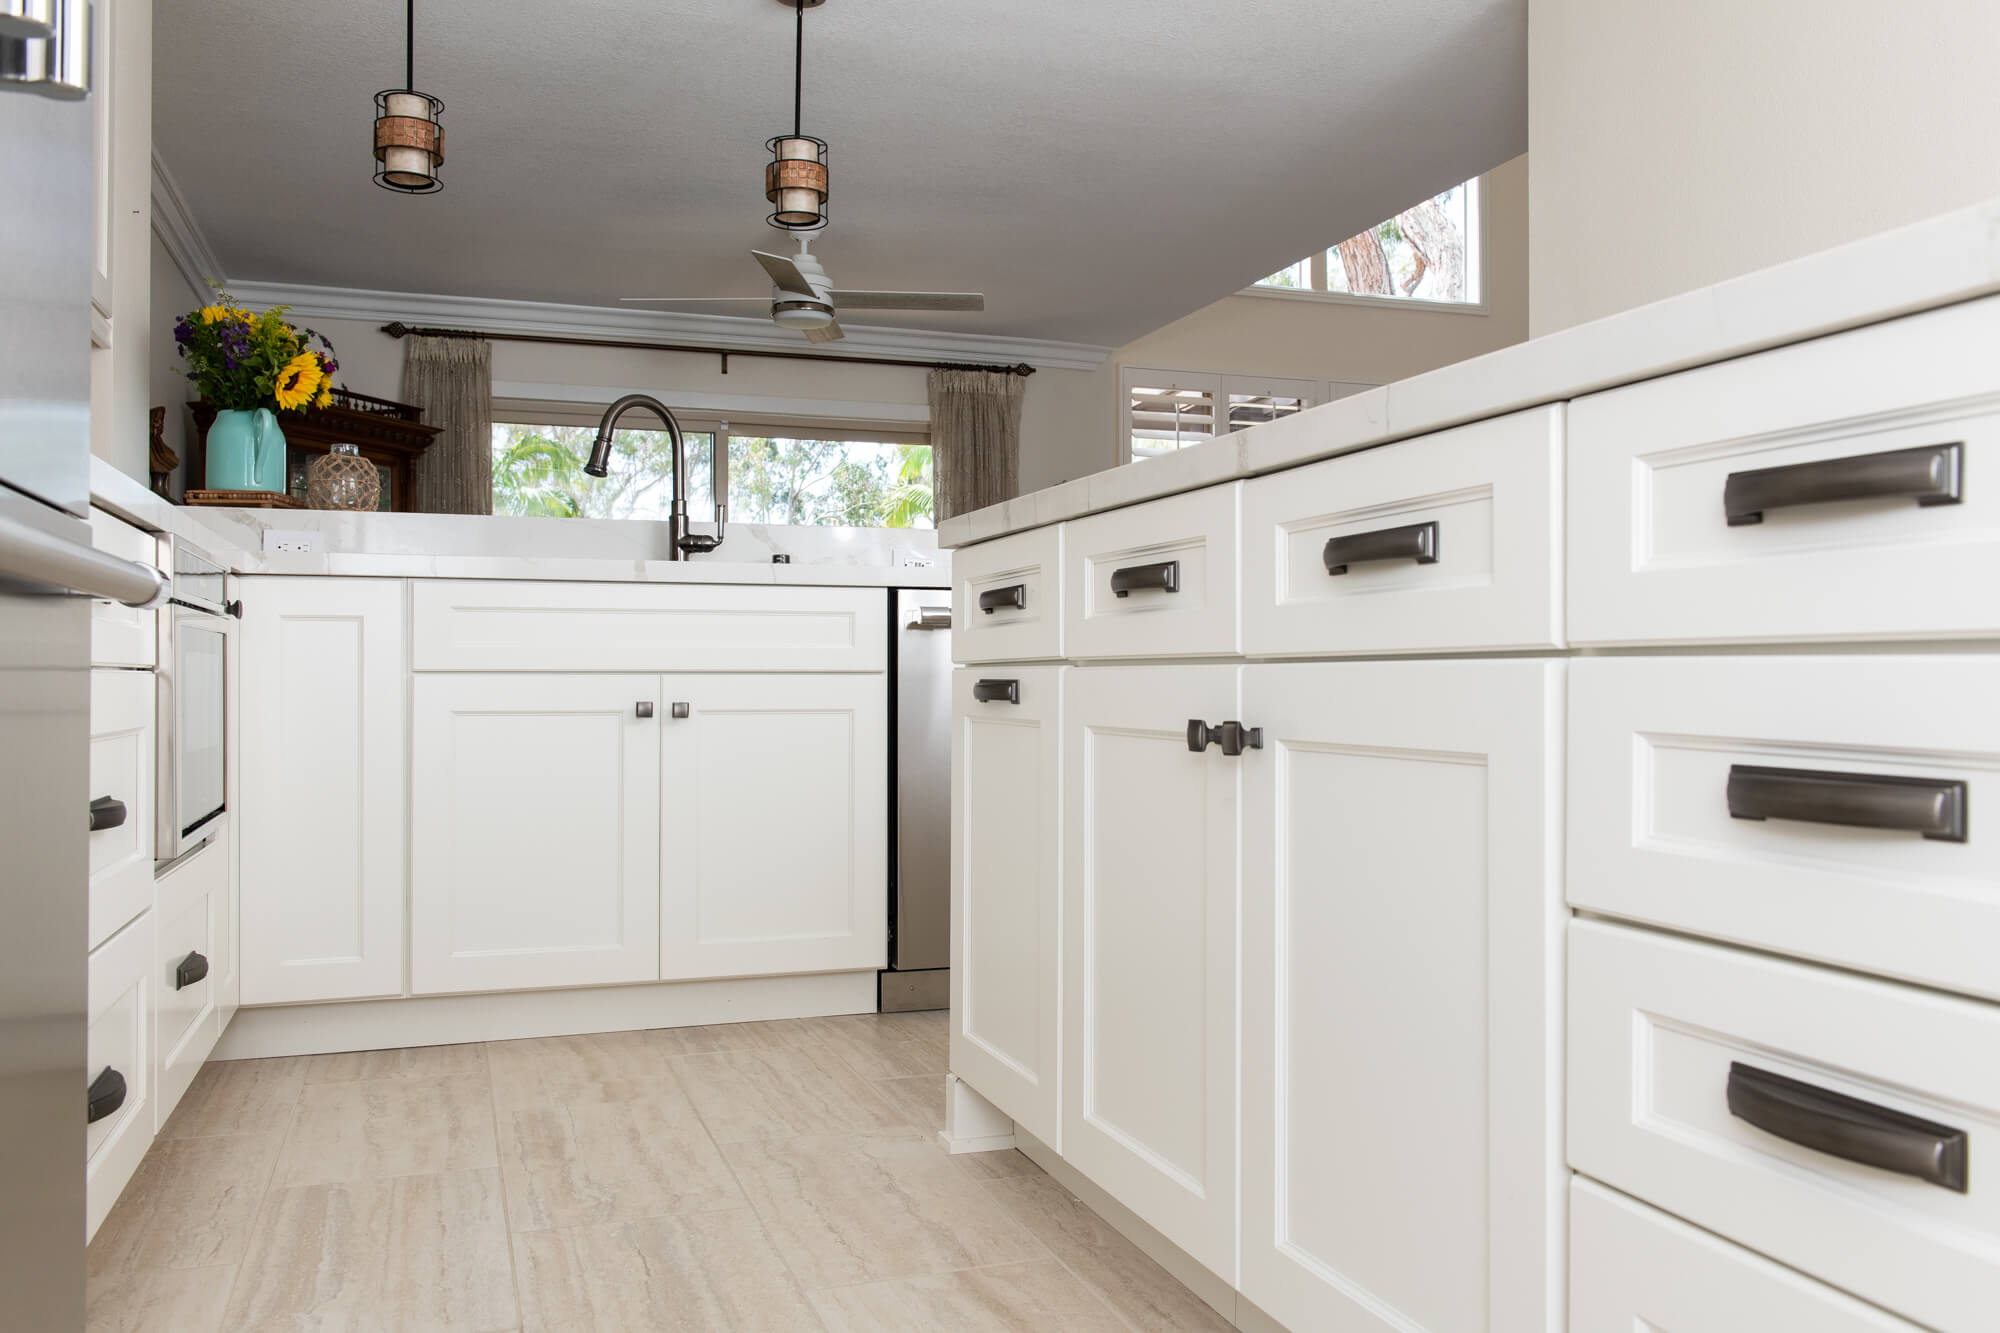 Kitchen Hardware Styles and Trends